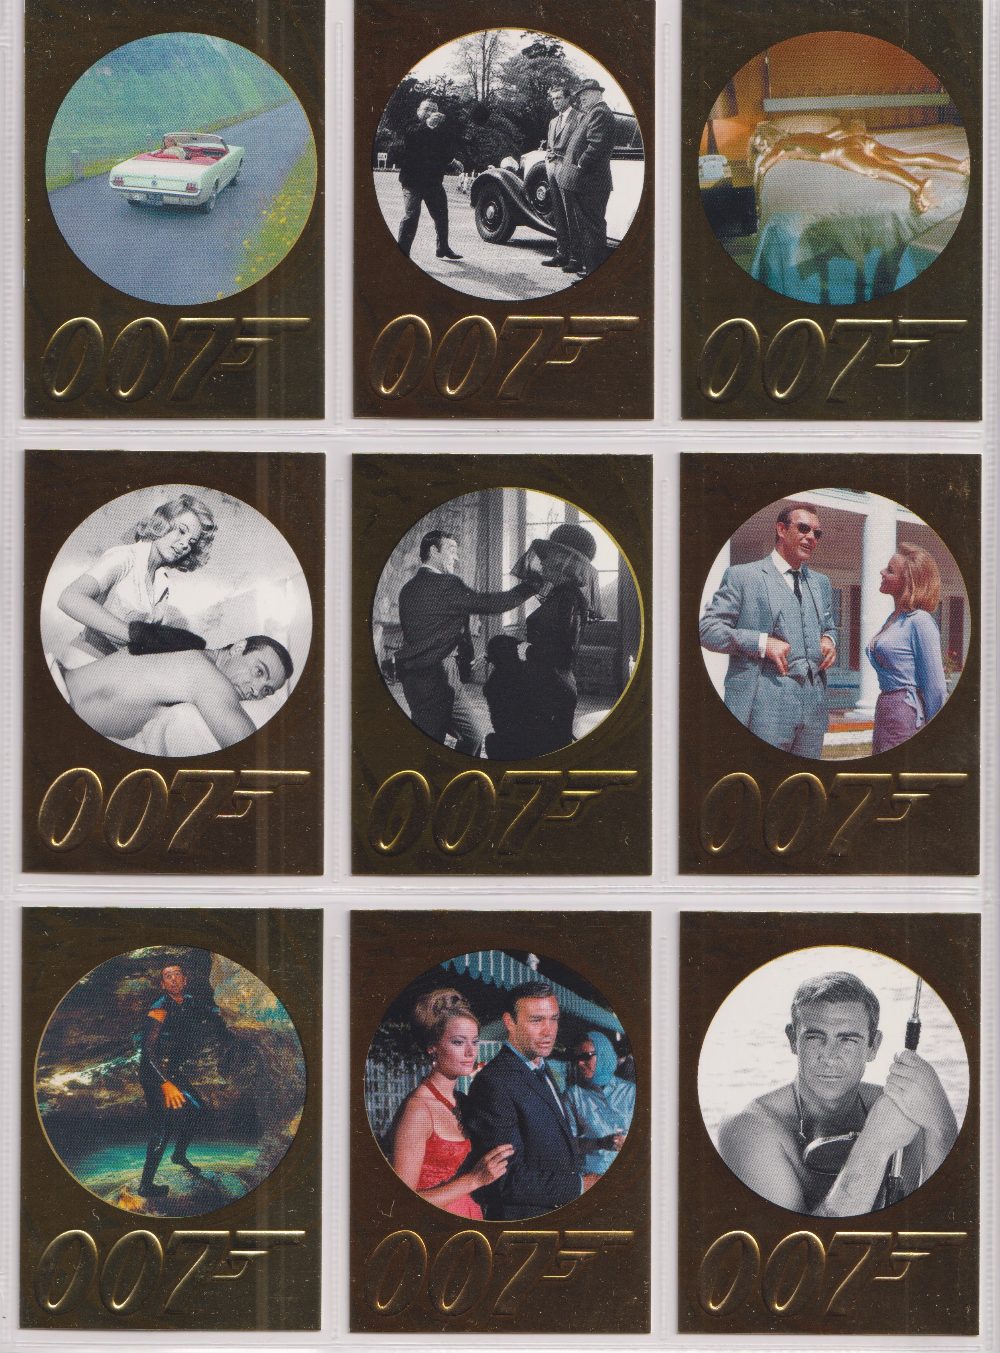 James Bond, 50th Anniversary Trading Cards Gold Cards (set of 198), Skyfall silhouette (4), Gold - Image 3 of 37